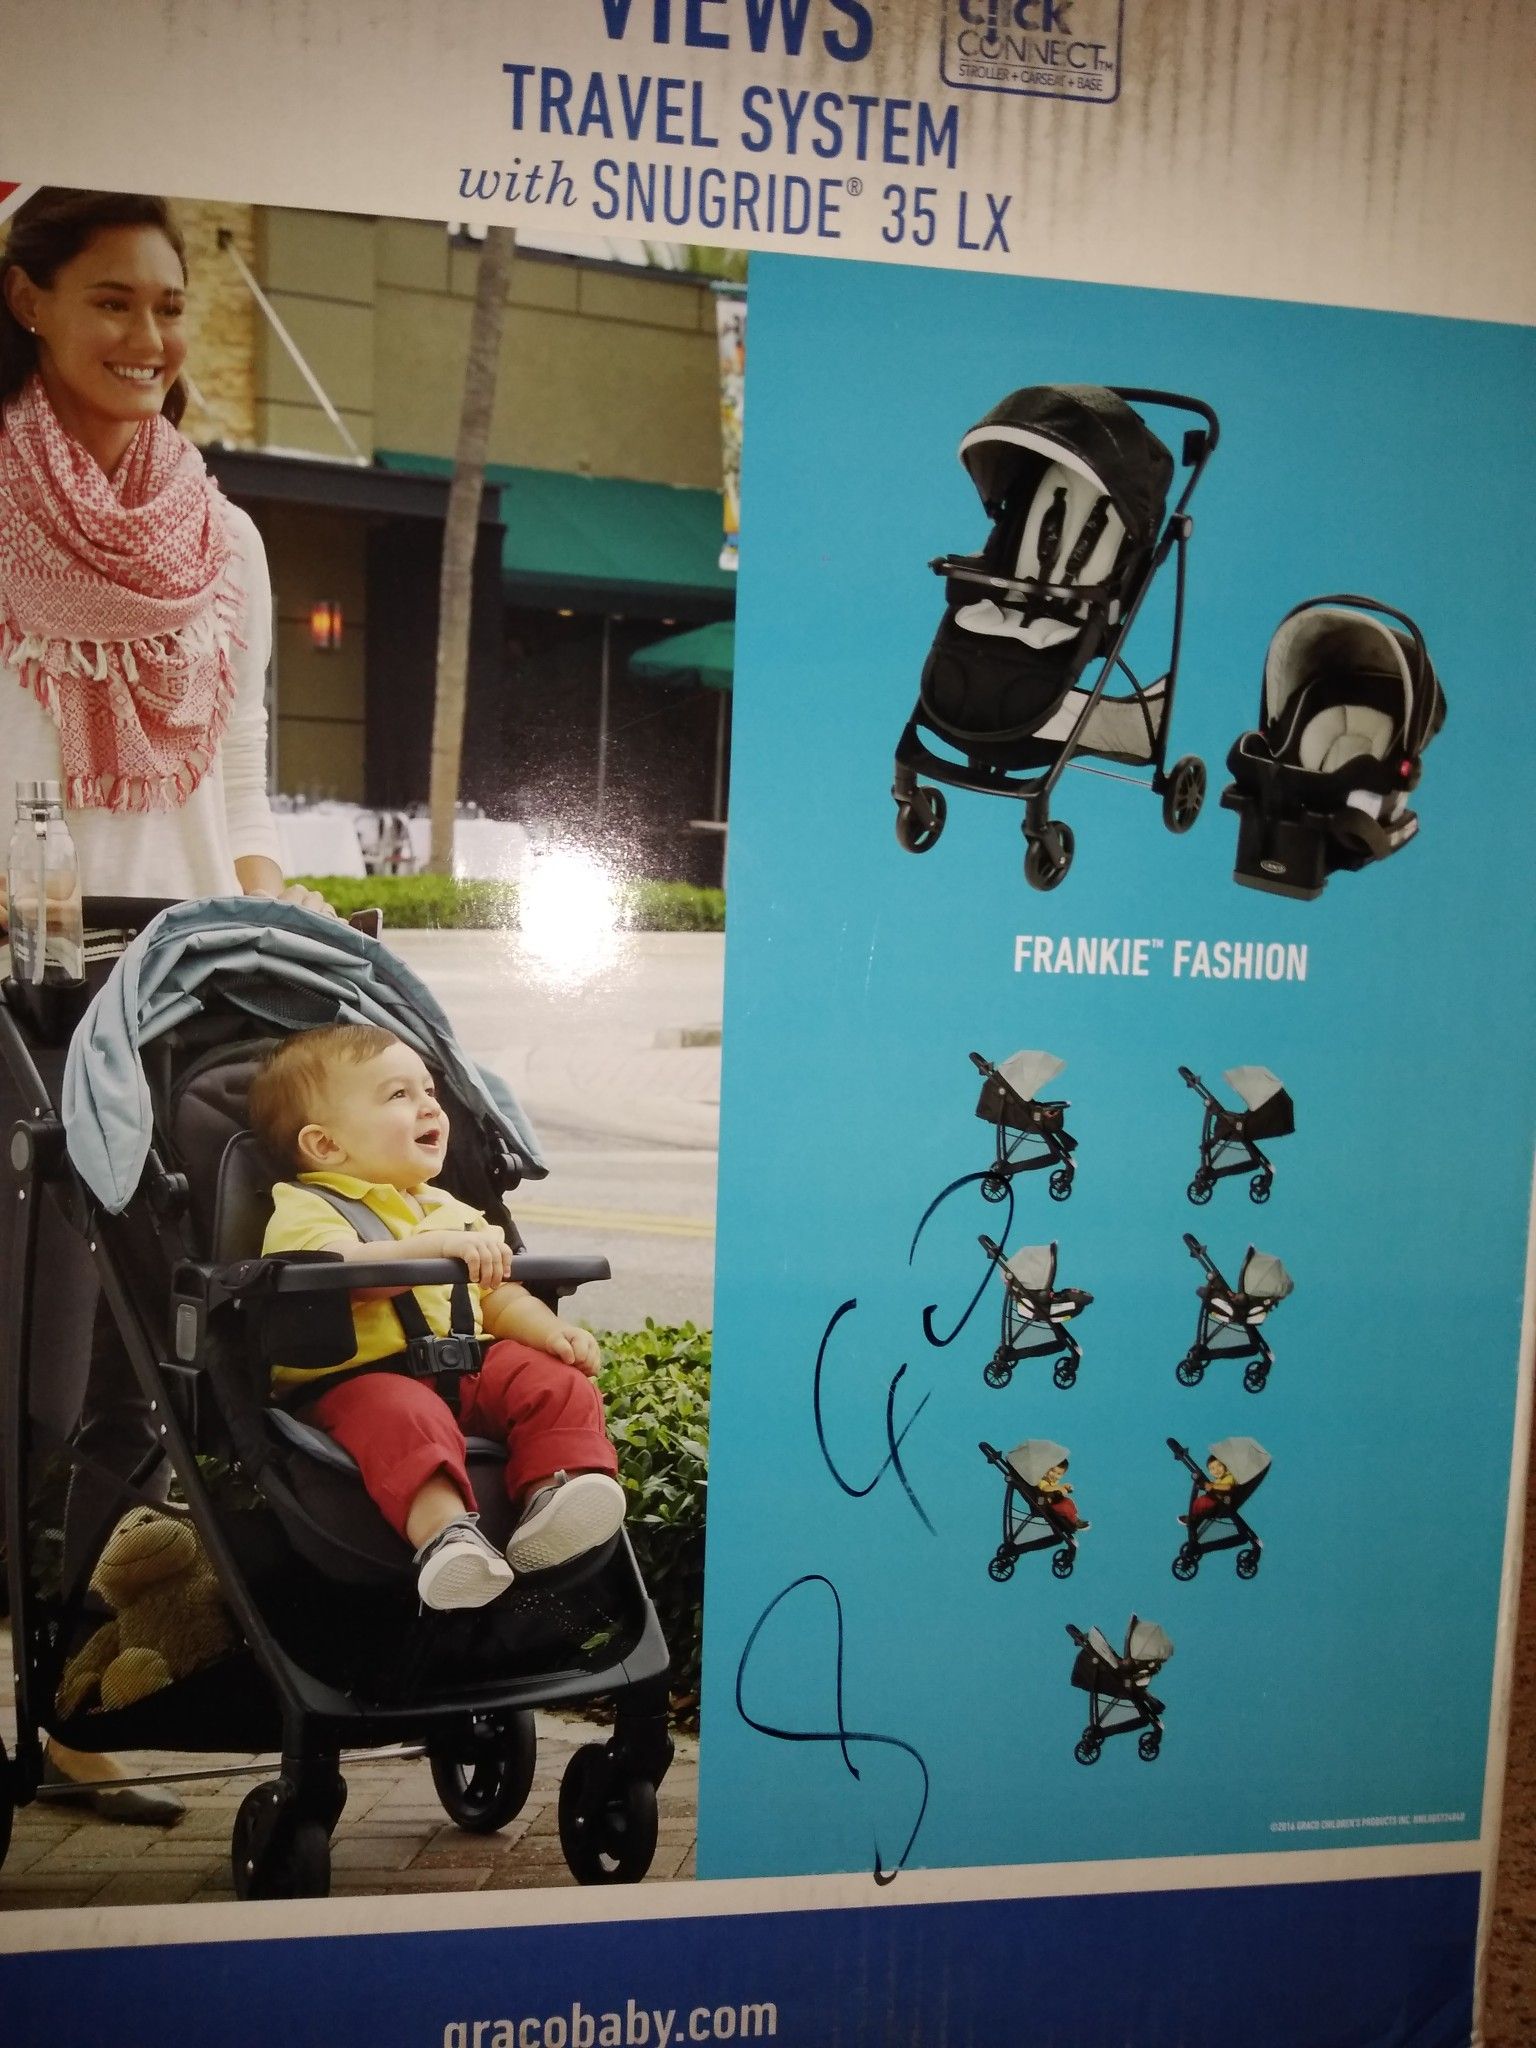 Never before opened* Brand new* Graco Baby Stroller 7 in 1 convertible with Car Seat*